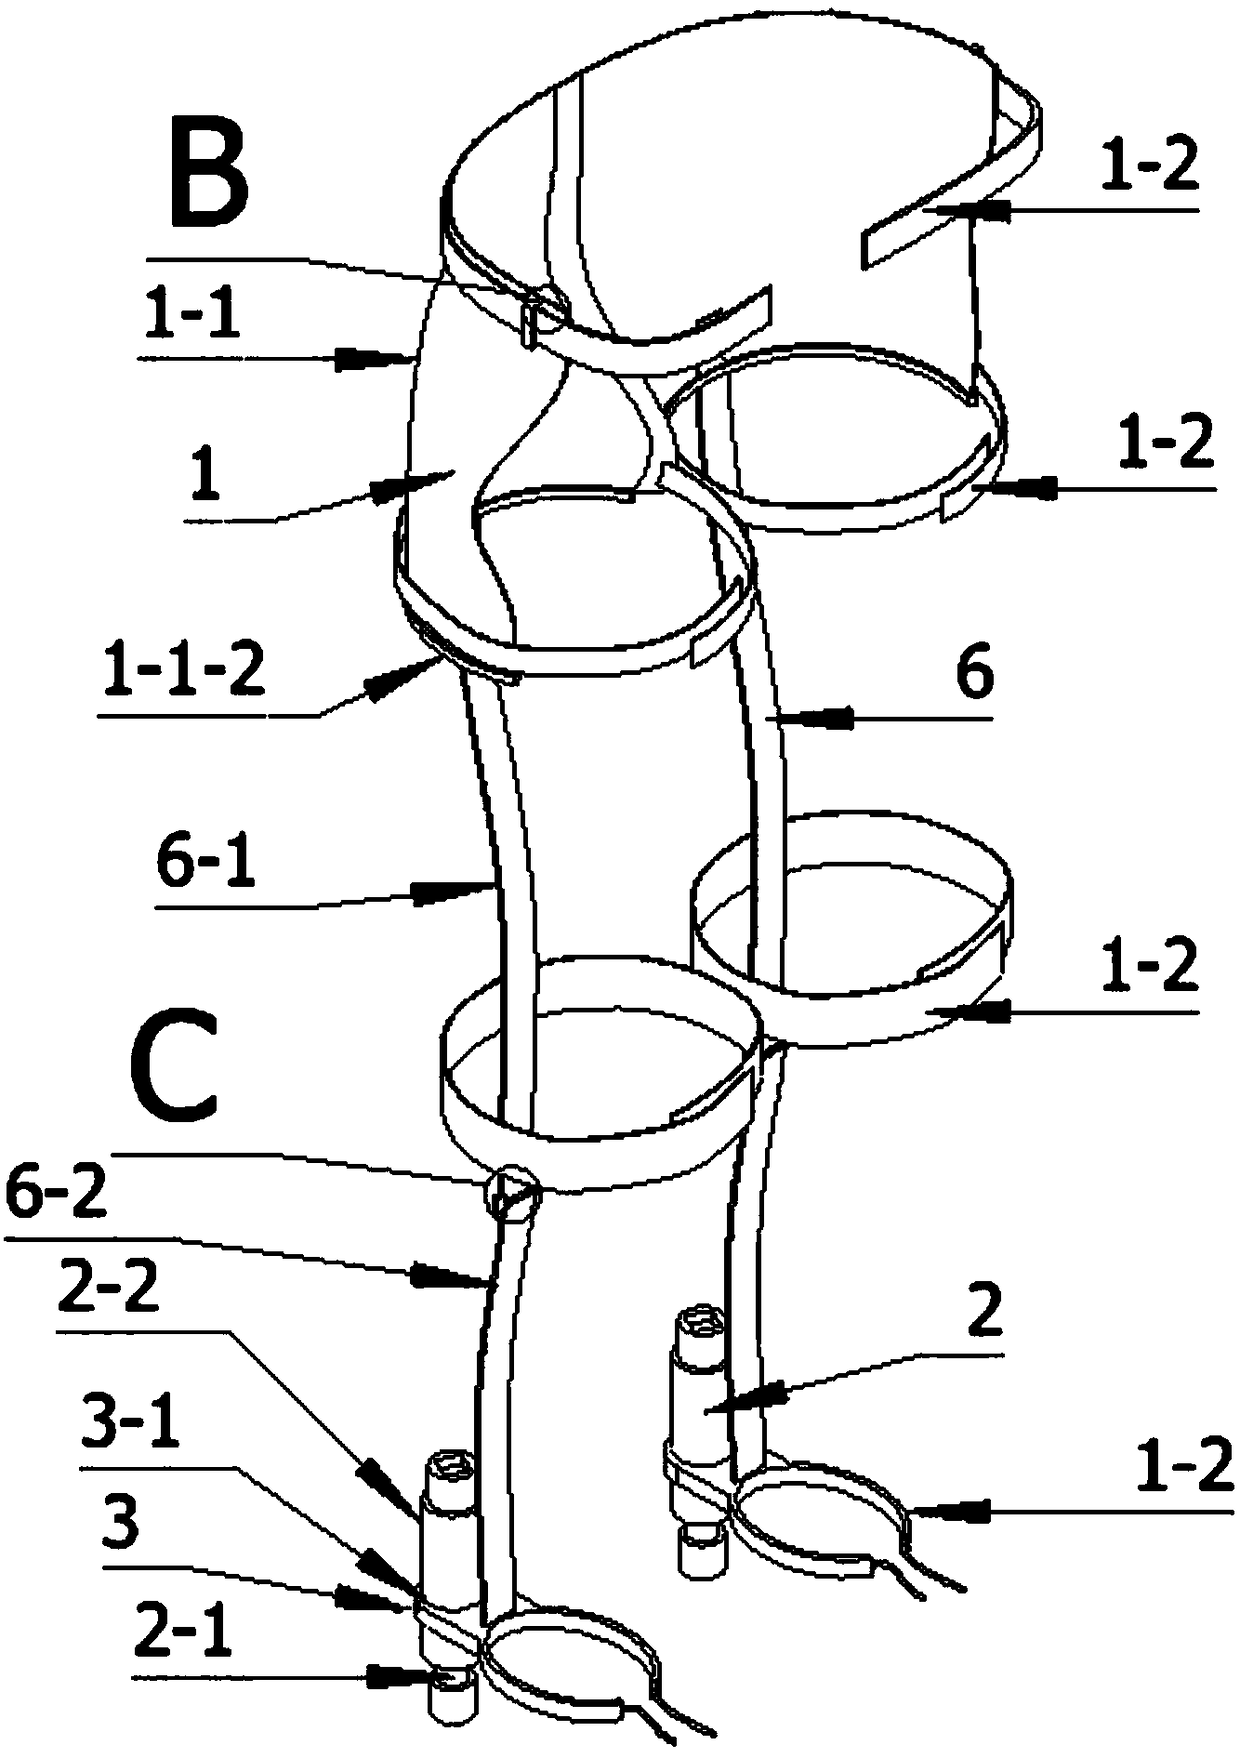 Standing support device